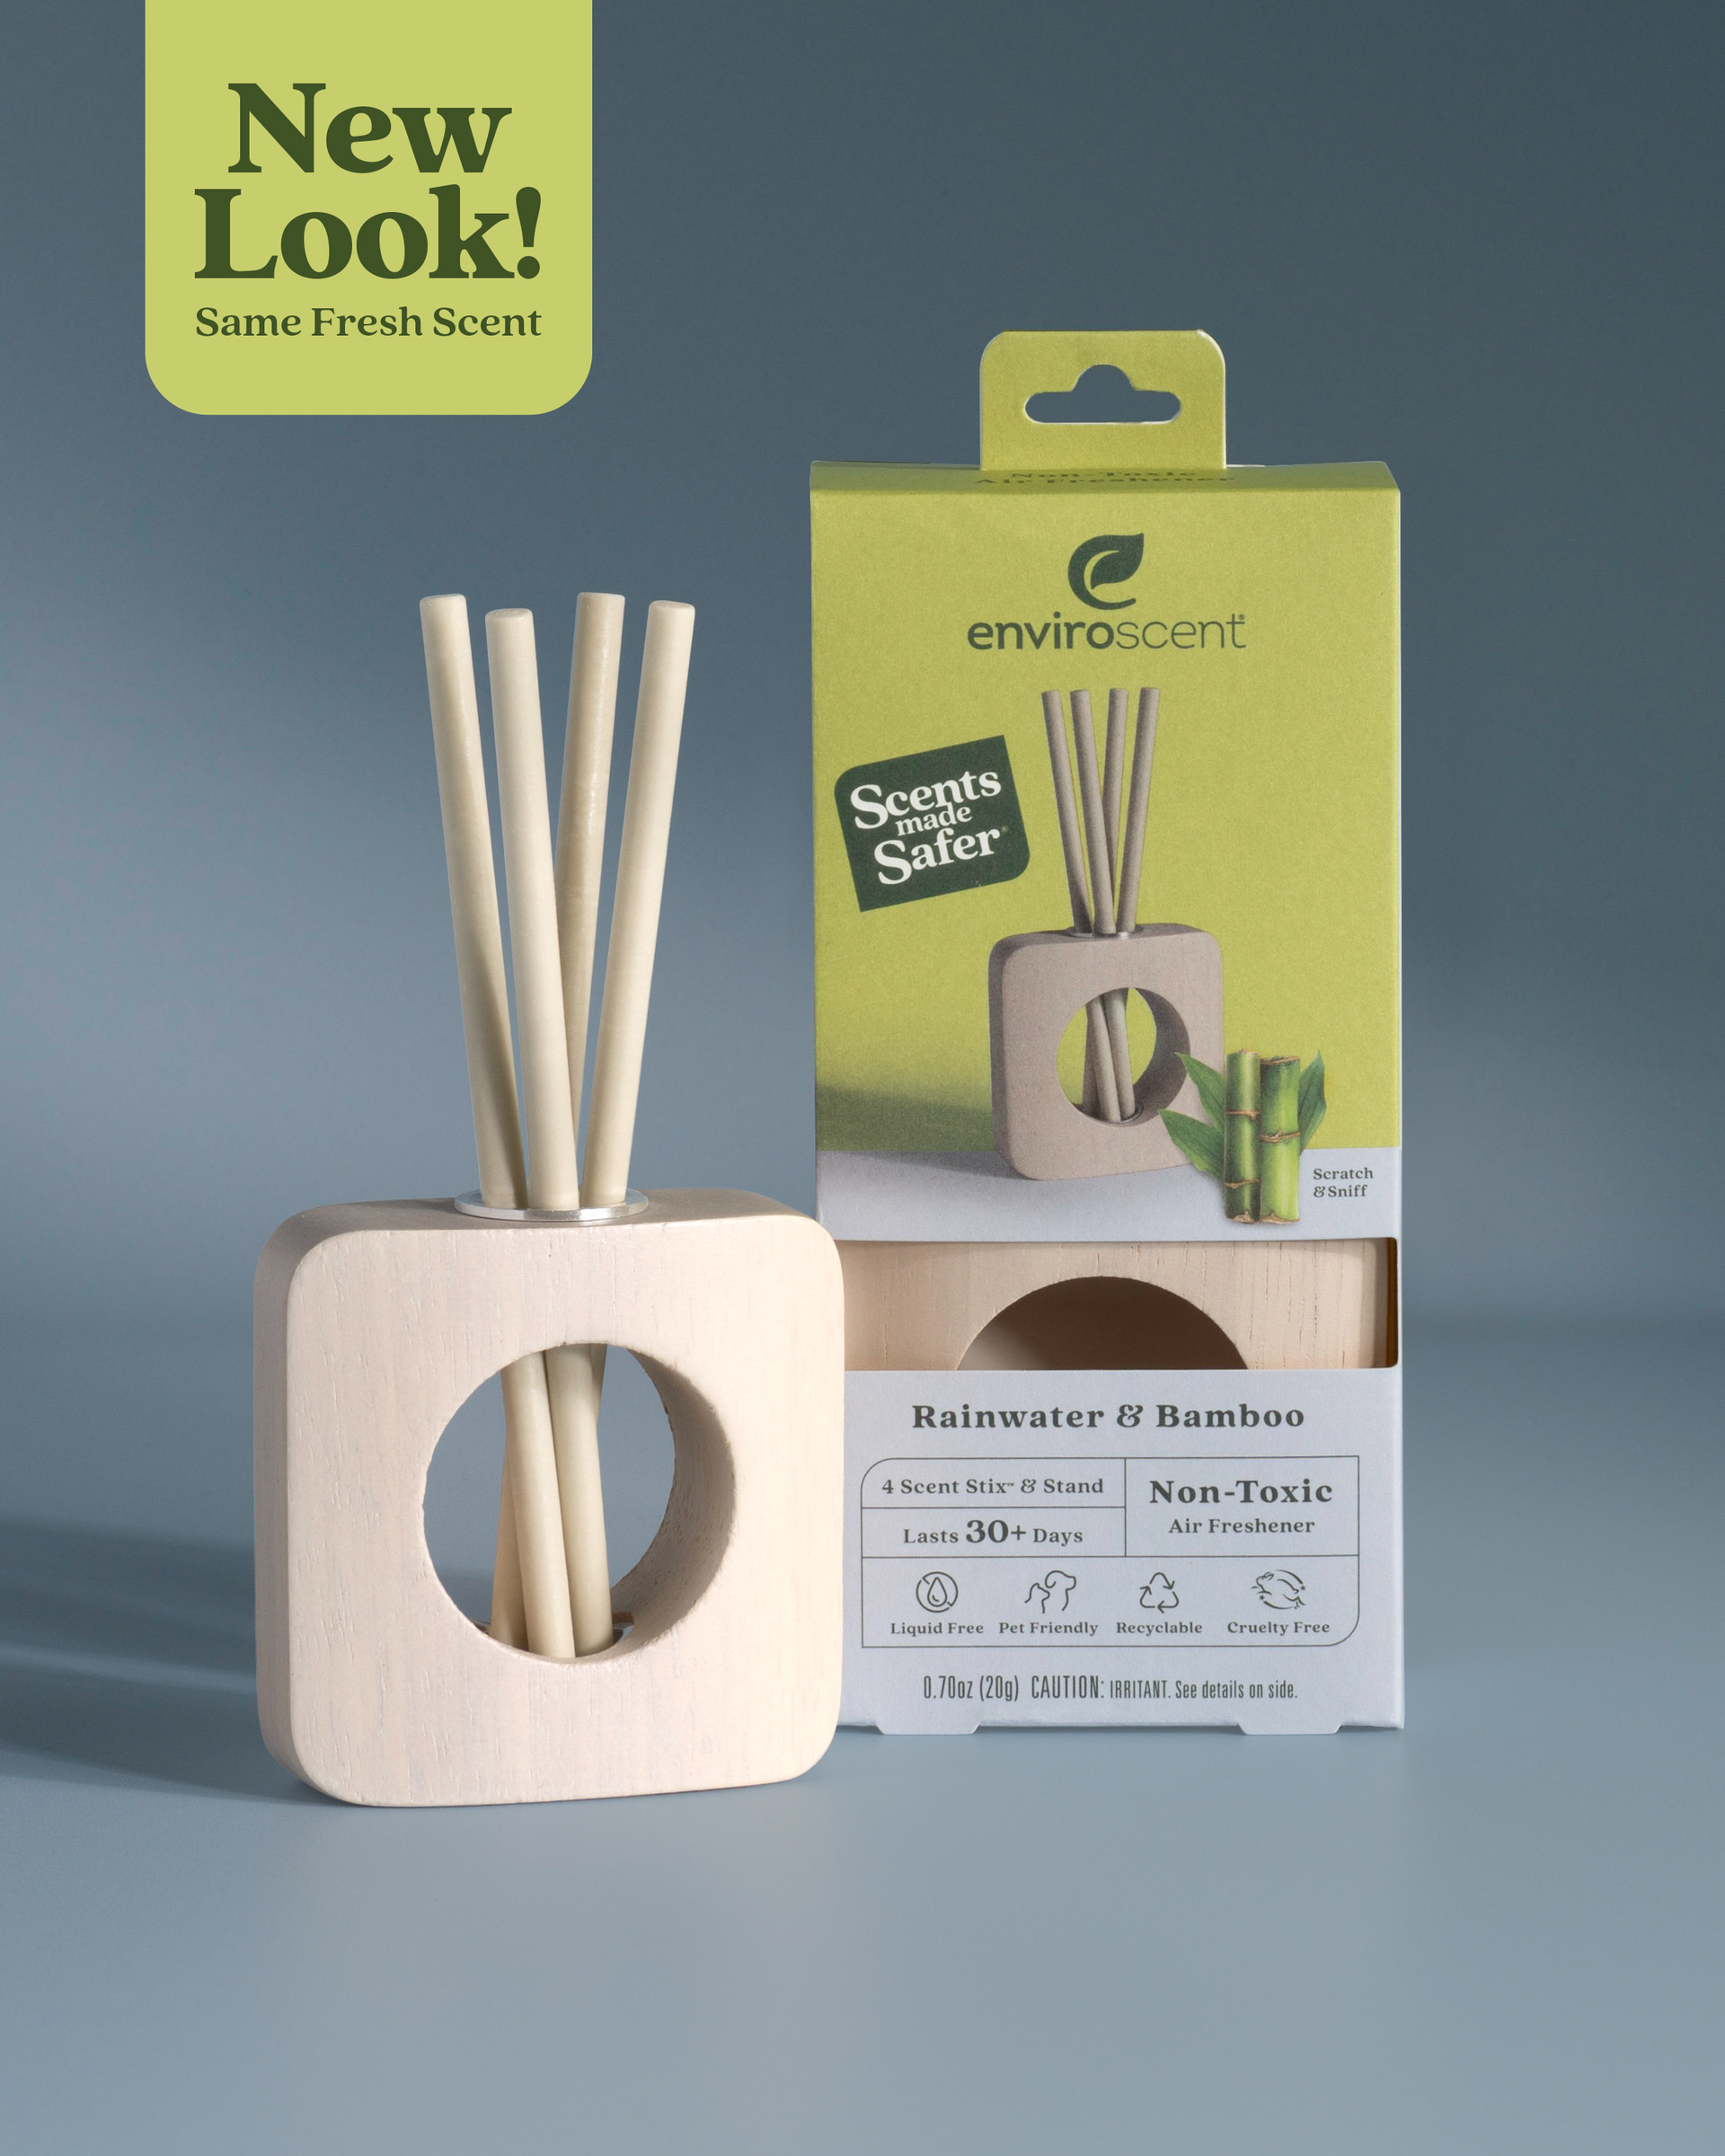 Rainwater & Bamboo Scent Stix + Stand Starter Kit in and out of packaging